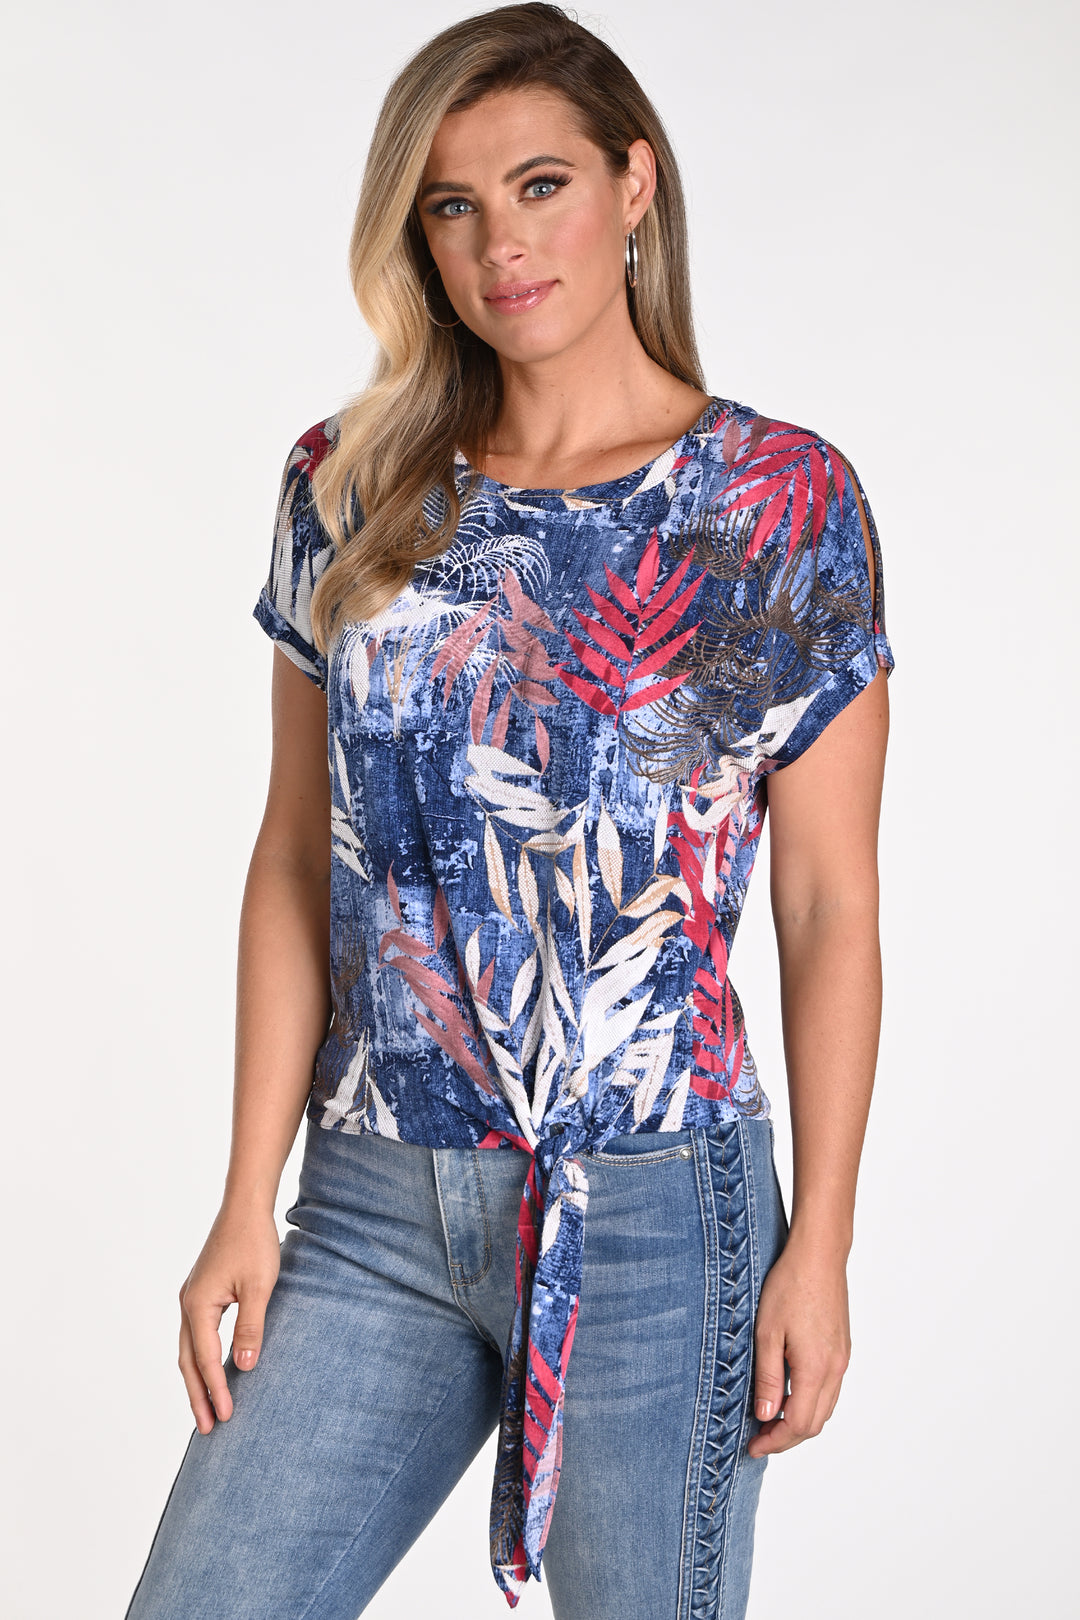 Frank Lyman Spring 2024 The tie knot detail at the front and the slit cut short sleeves adds a trendy touch to the tropical floral pattern.